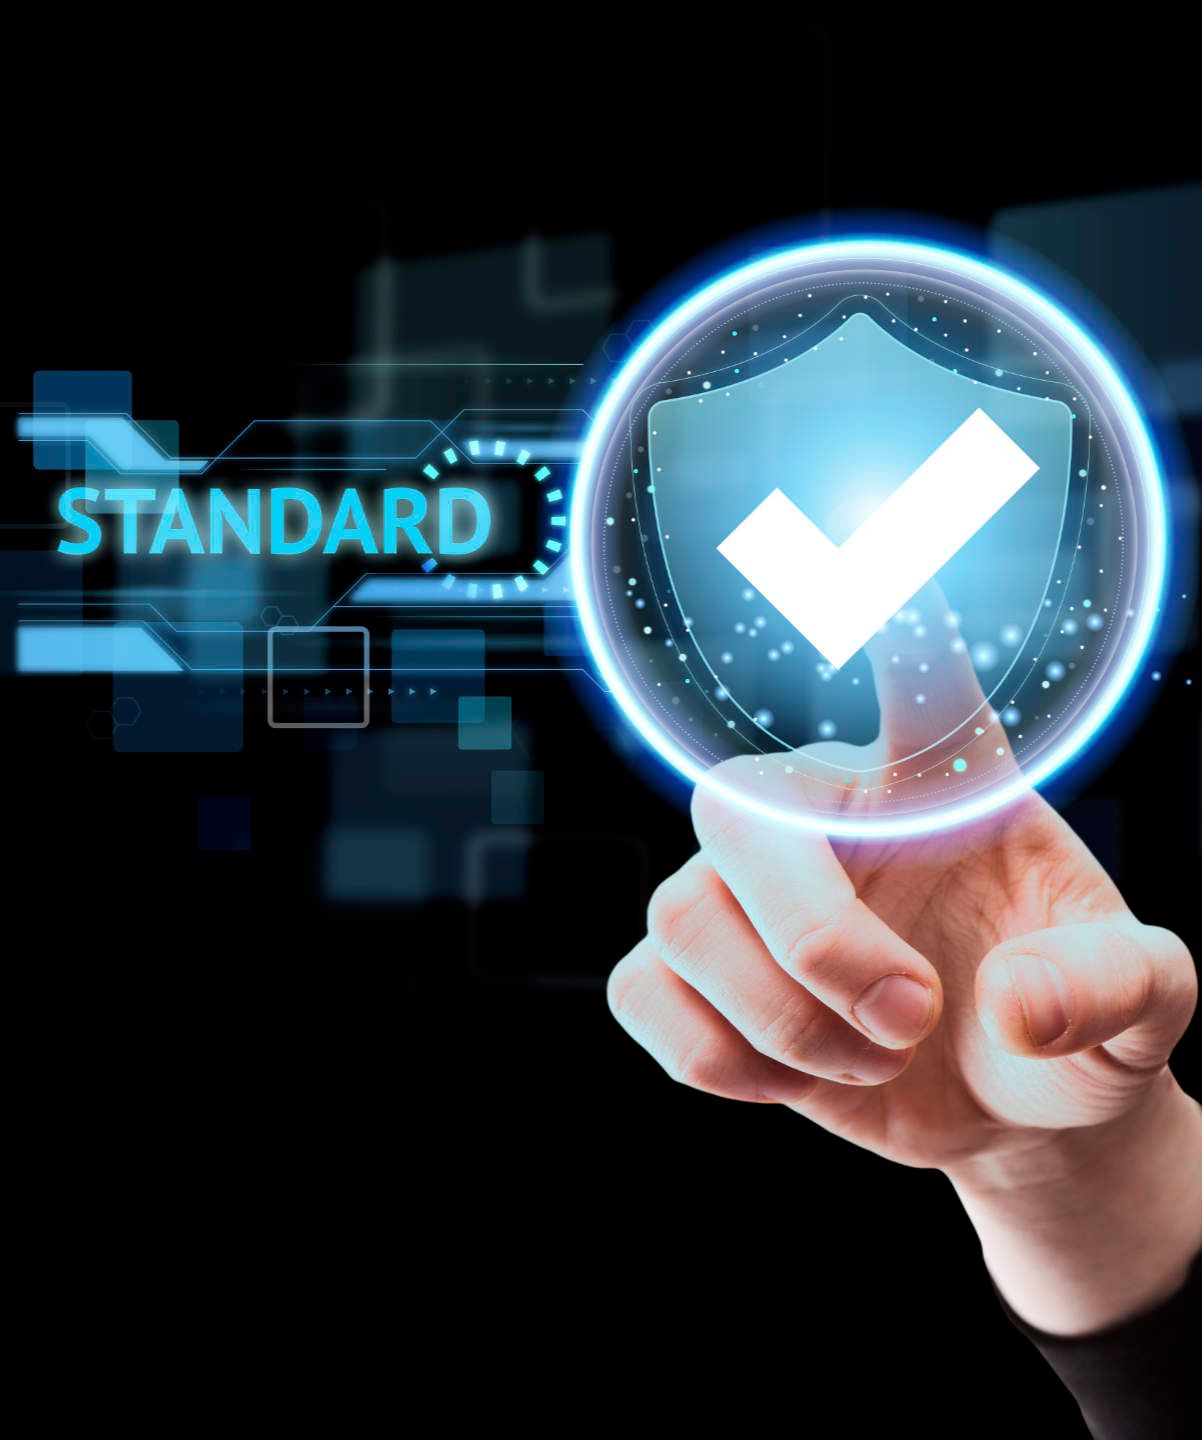 Objectives and scope of the ISO 27017, ISO 27018 and ISO 27036 standards.